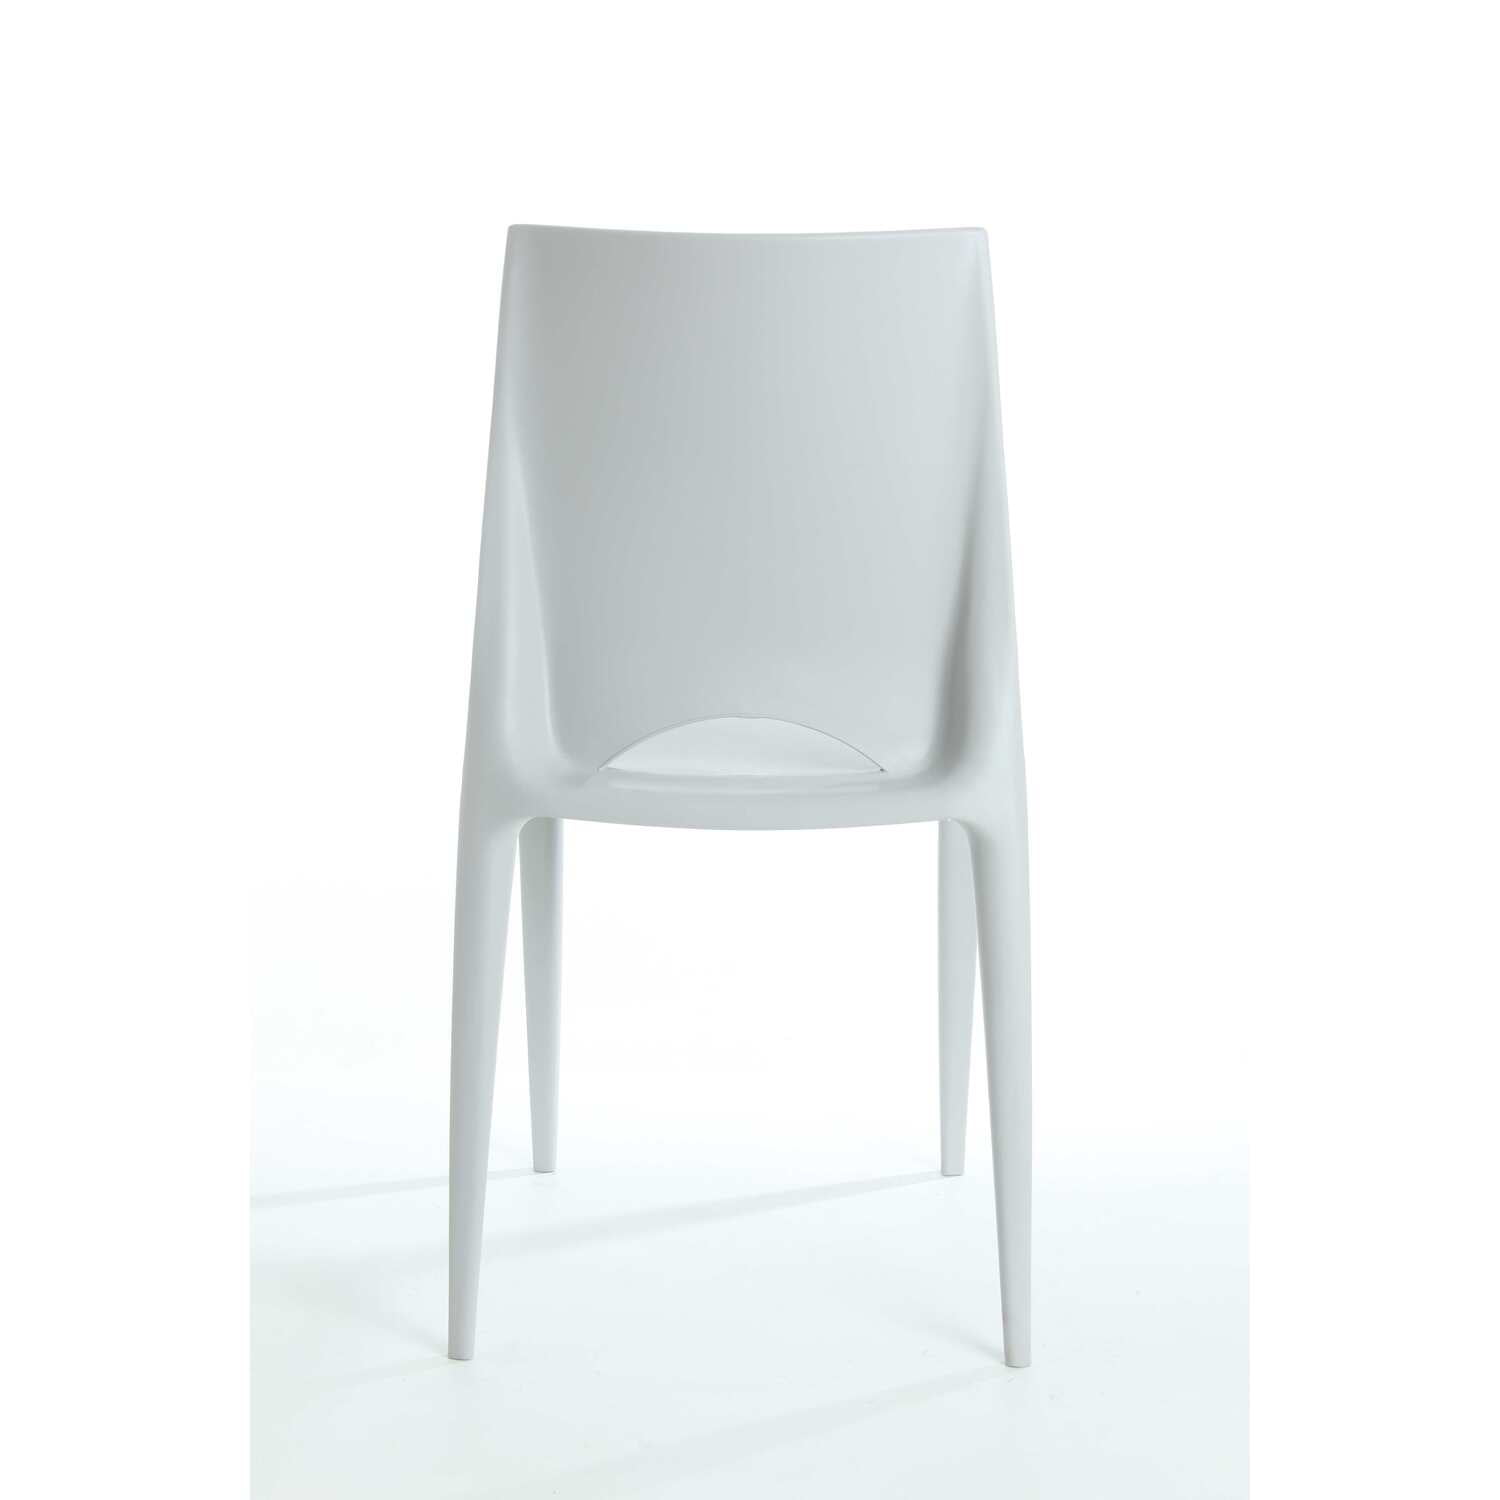 Picture of Commercial Seating Products RPP-Crescent-LG Crescent Polyproplylene Stackable Chair - Light Grey - 32 in.